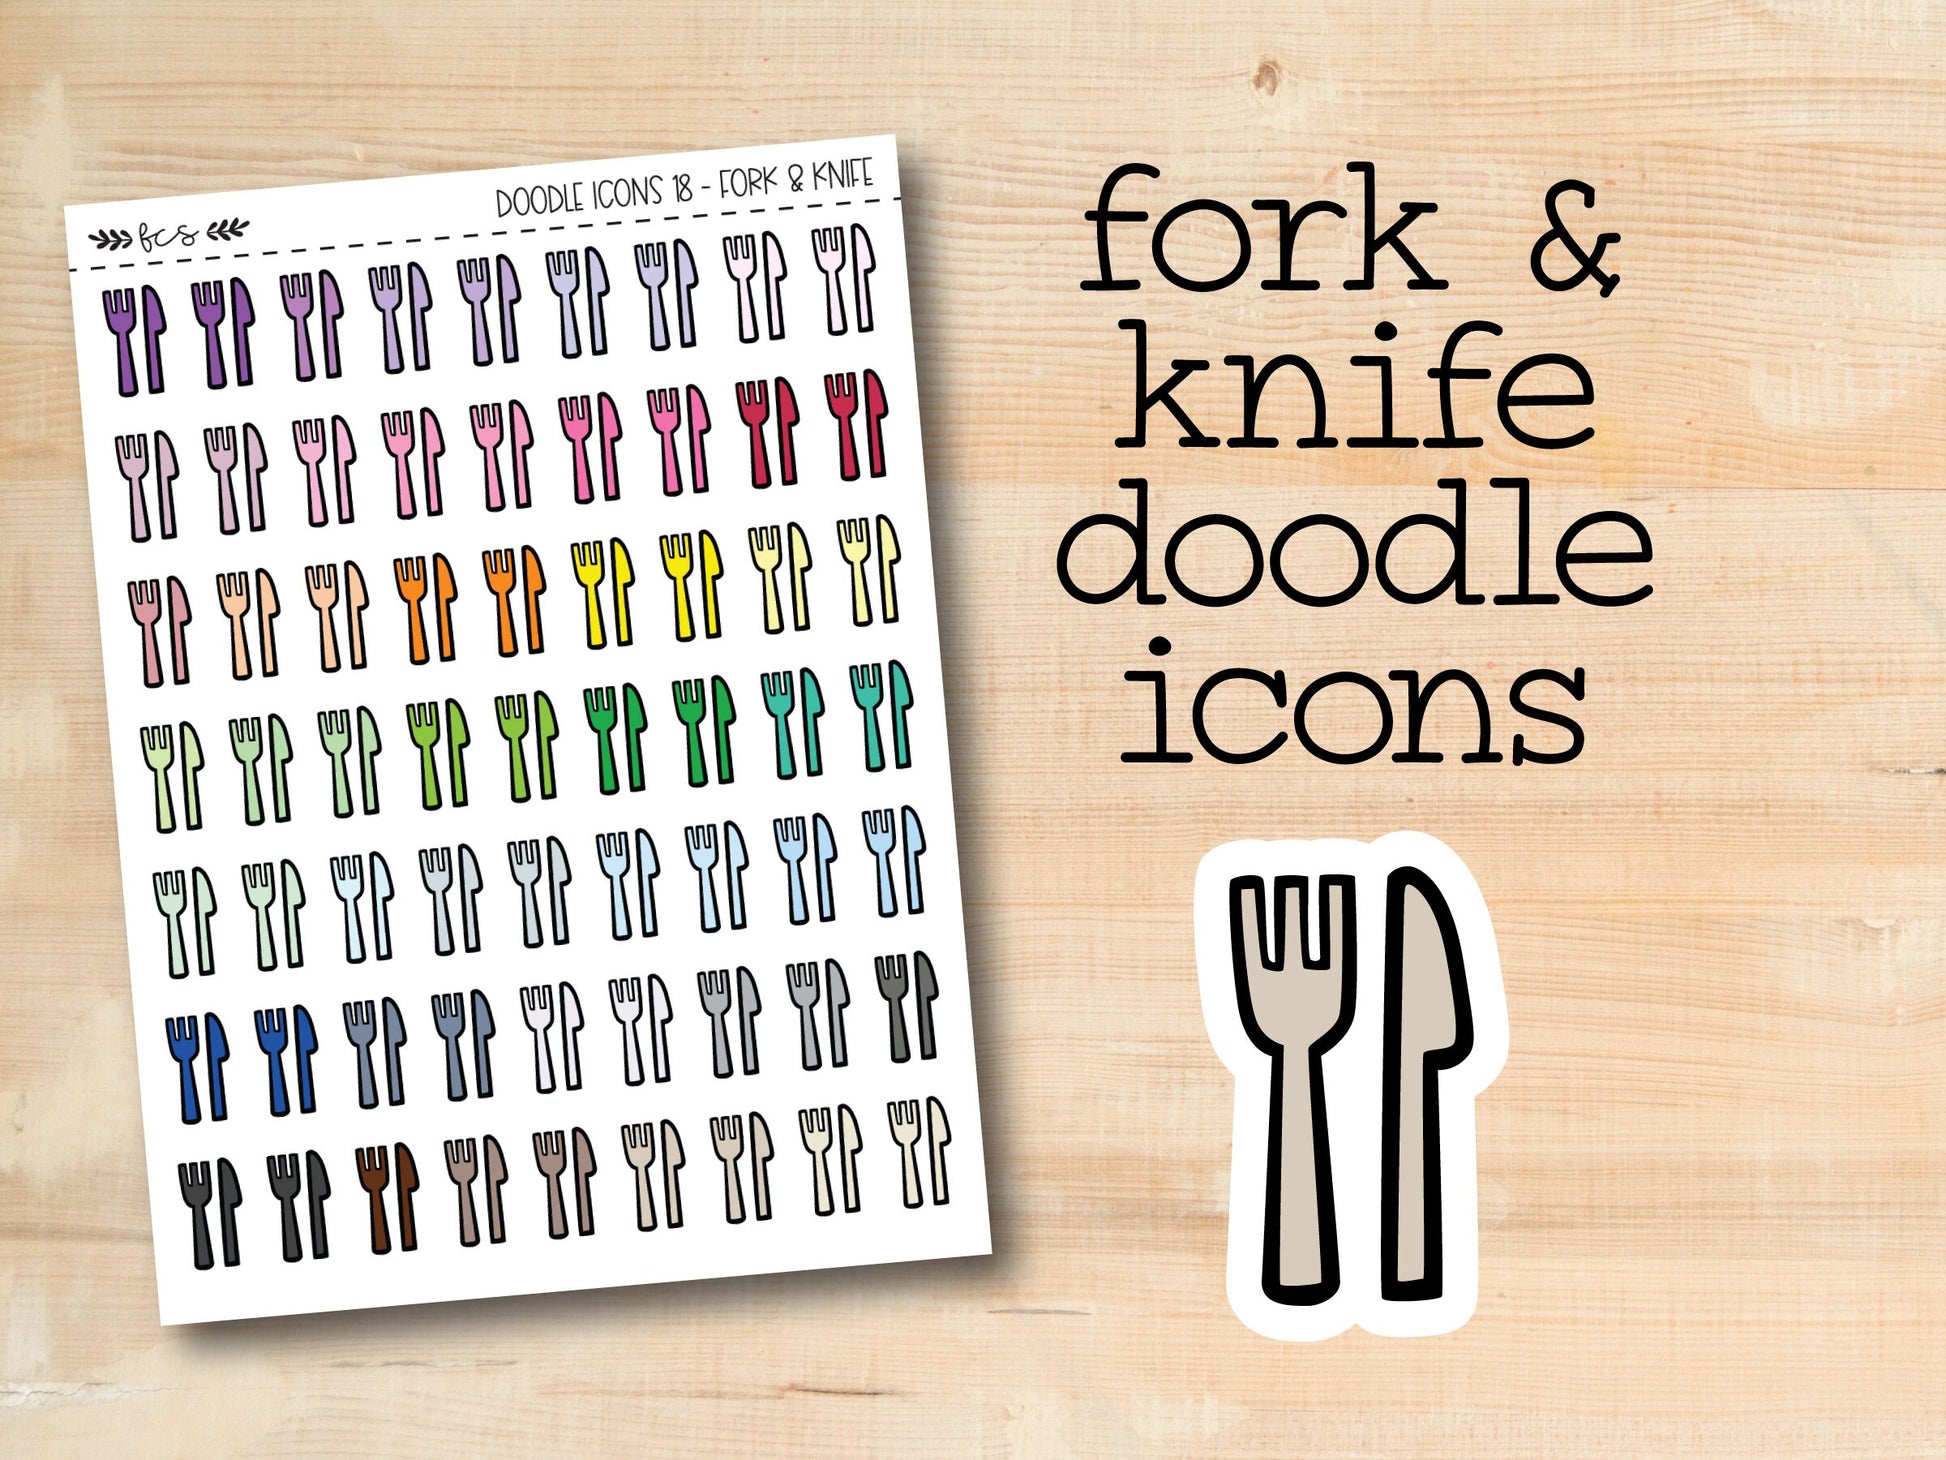 fork and knife doodle icons on a wooden background